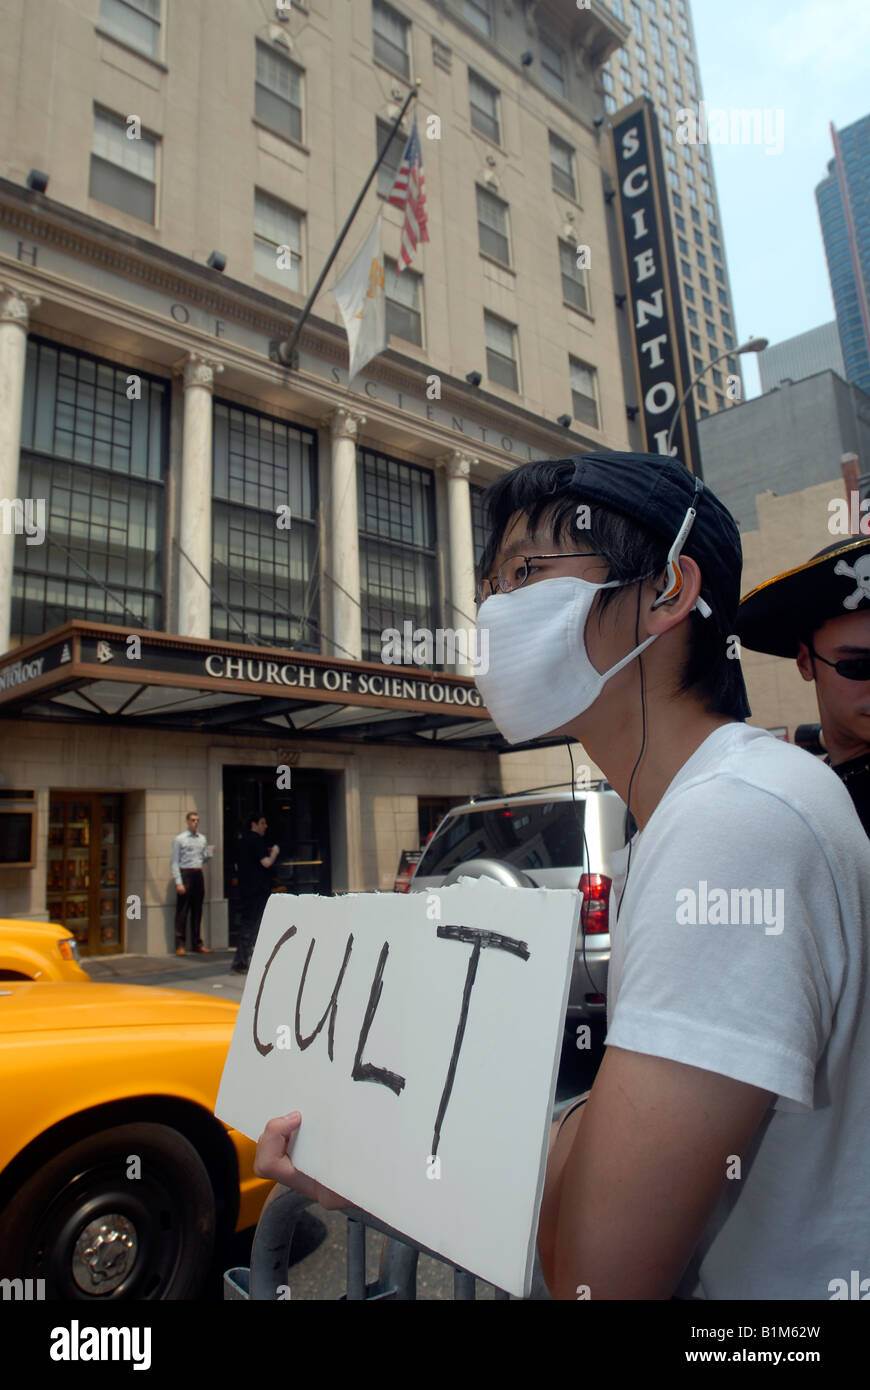 Members of the anti Scientology group calling themselves Anonymous protest outside the Church of Scientology in midtown New York Stock Photo